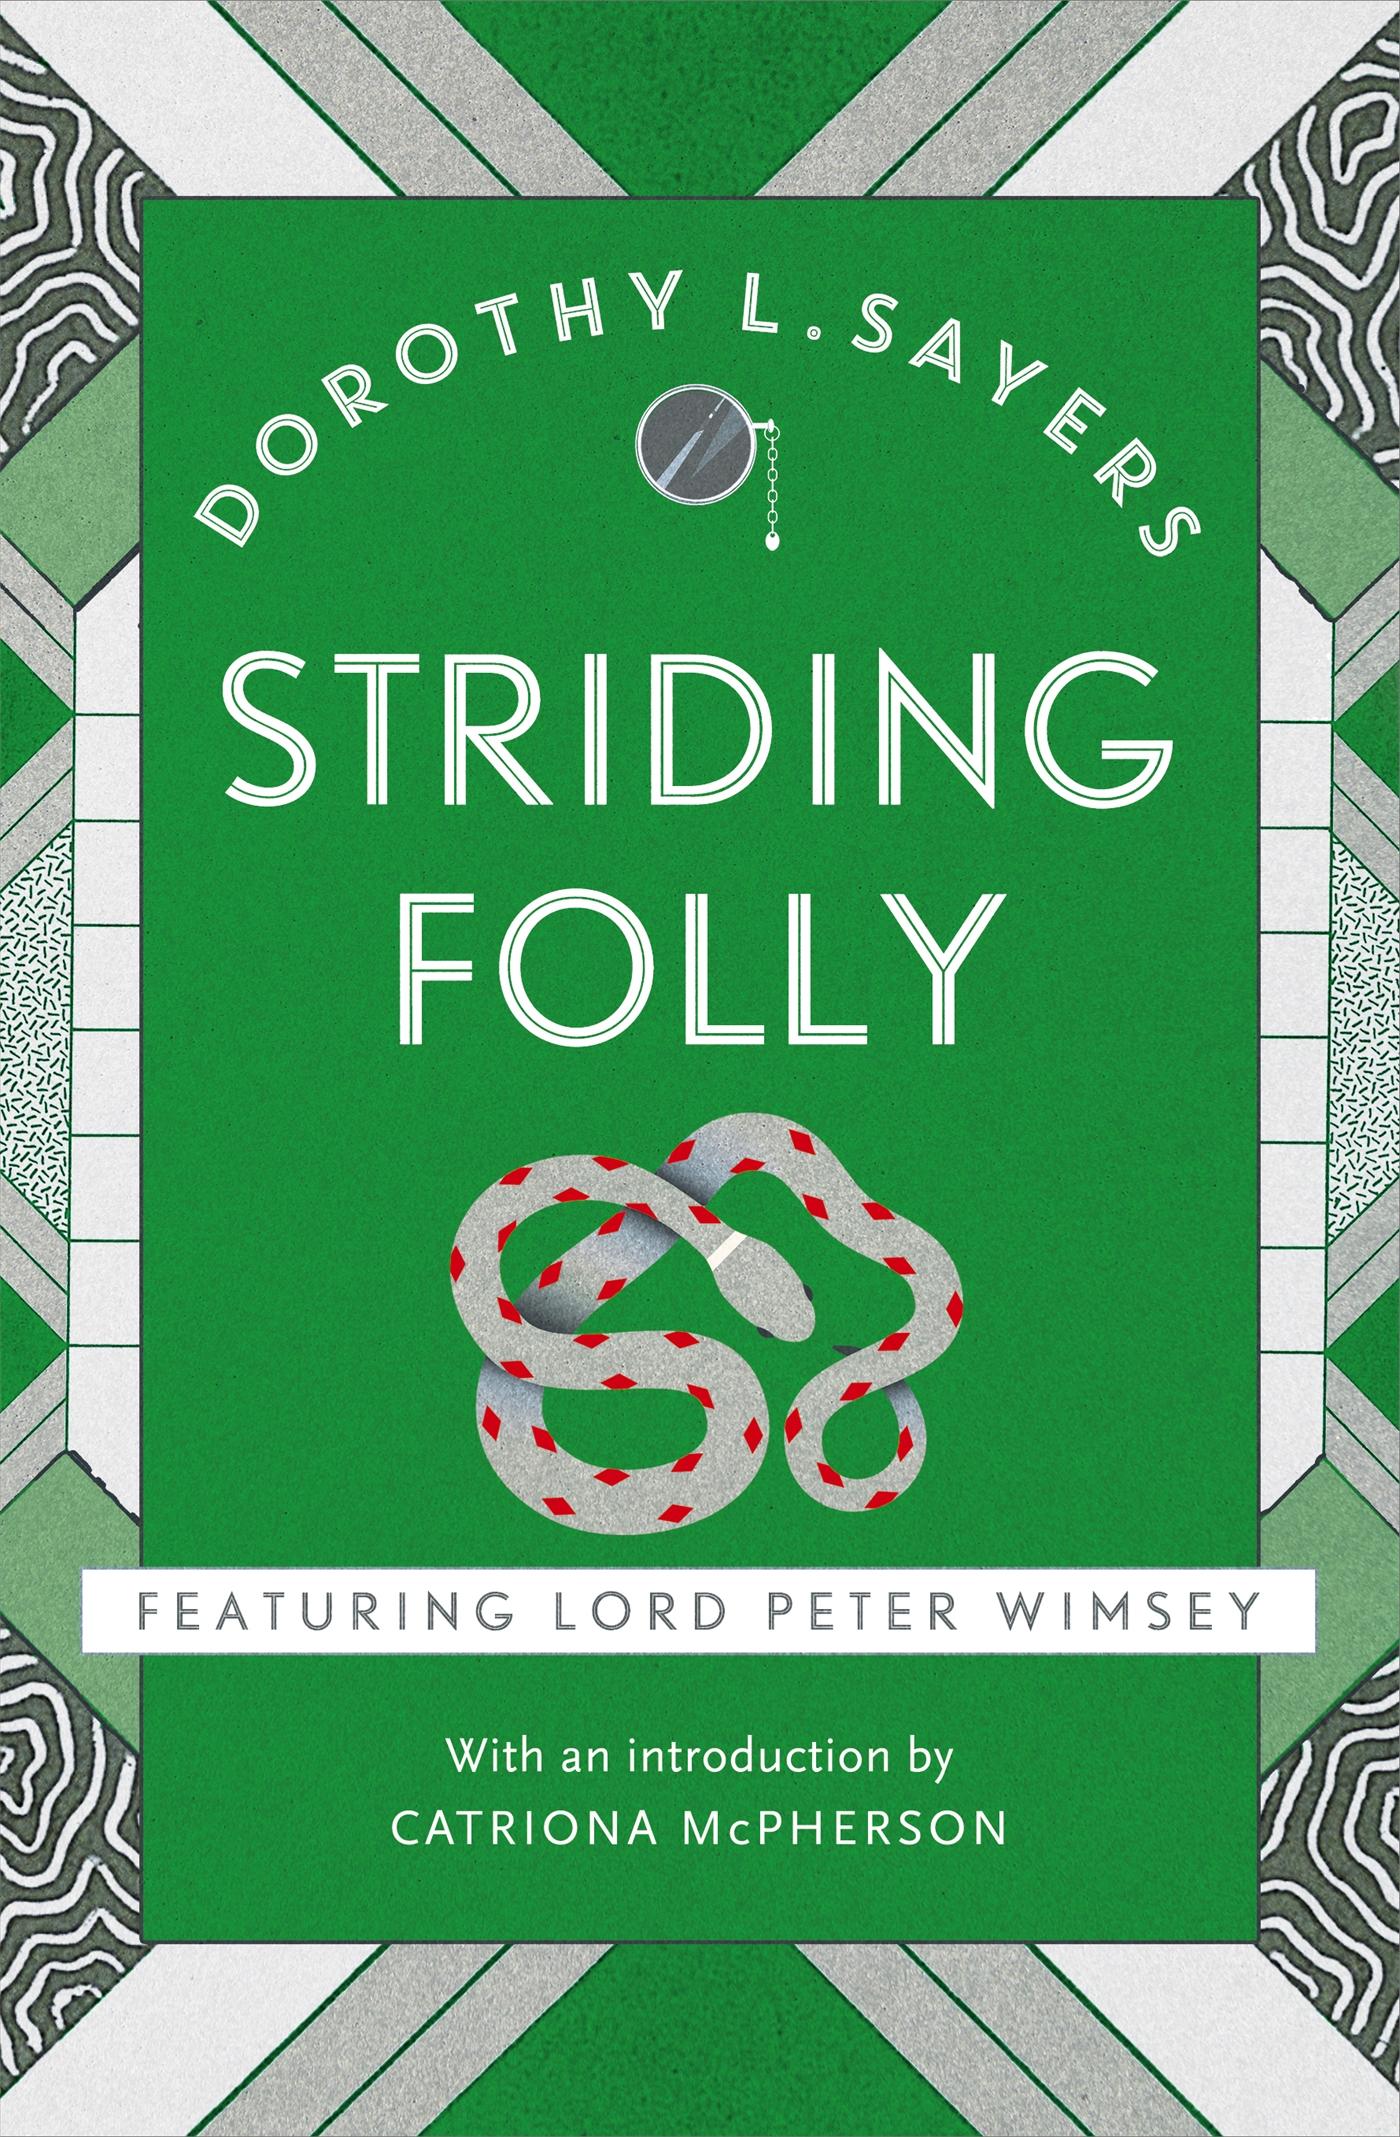 Striding Folly / Classic crime fiction you need to read / Dorothy L Sayers / Taschenbuch / 162 S. / Englisch / 2017 / Hodder & Stoughton / EAN 9781473621510 - Sayers, Dorothy L